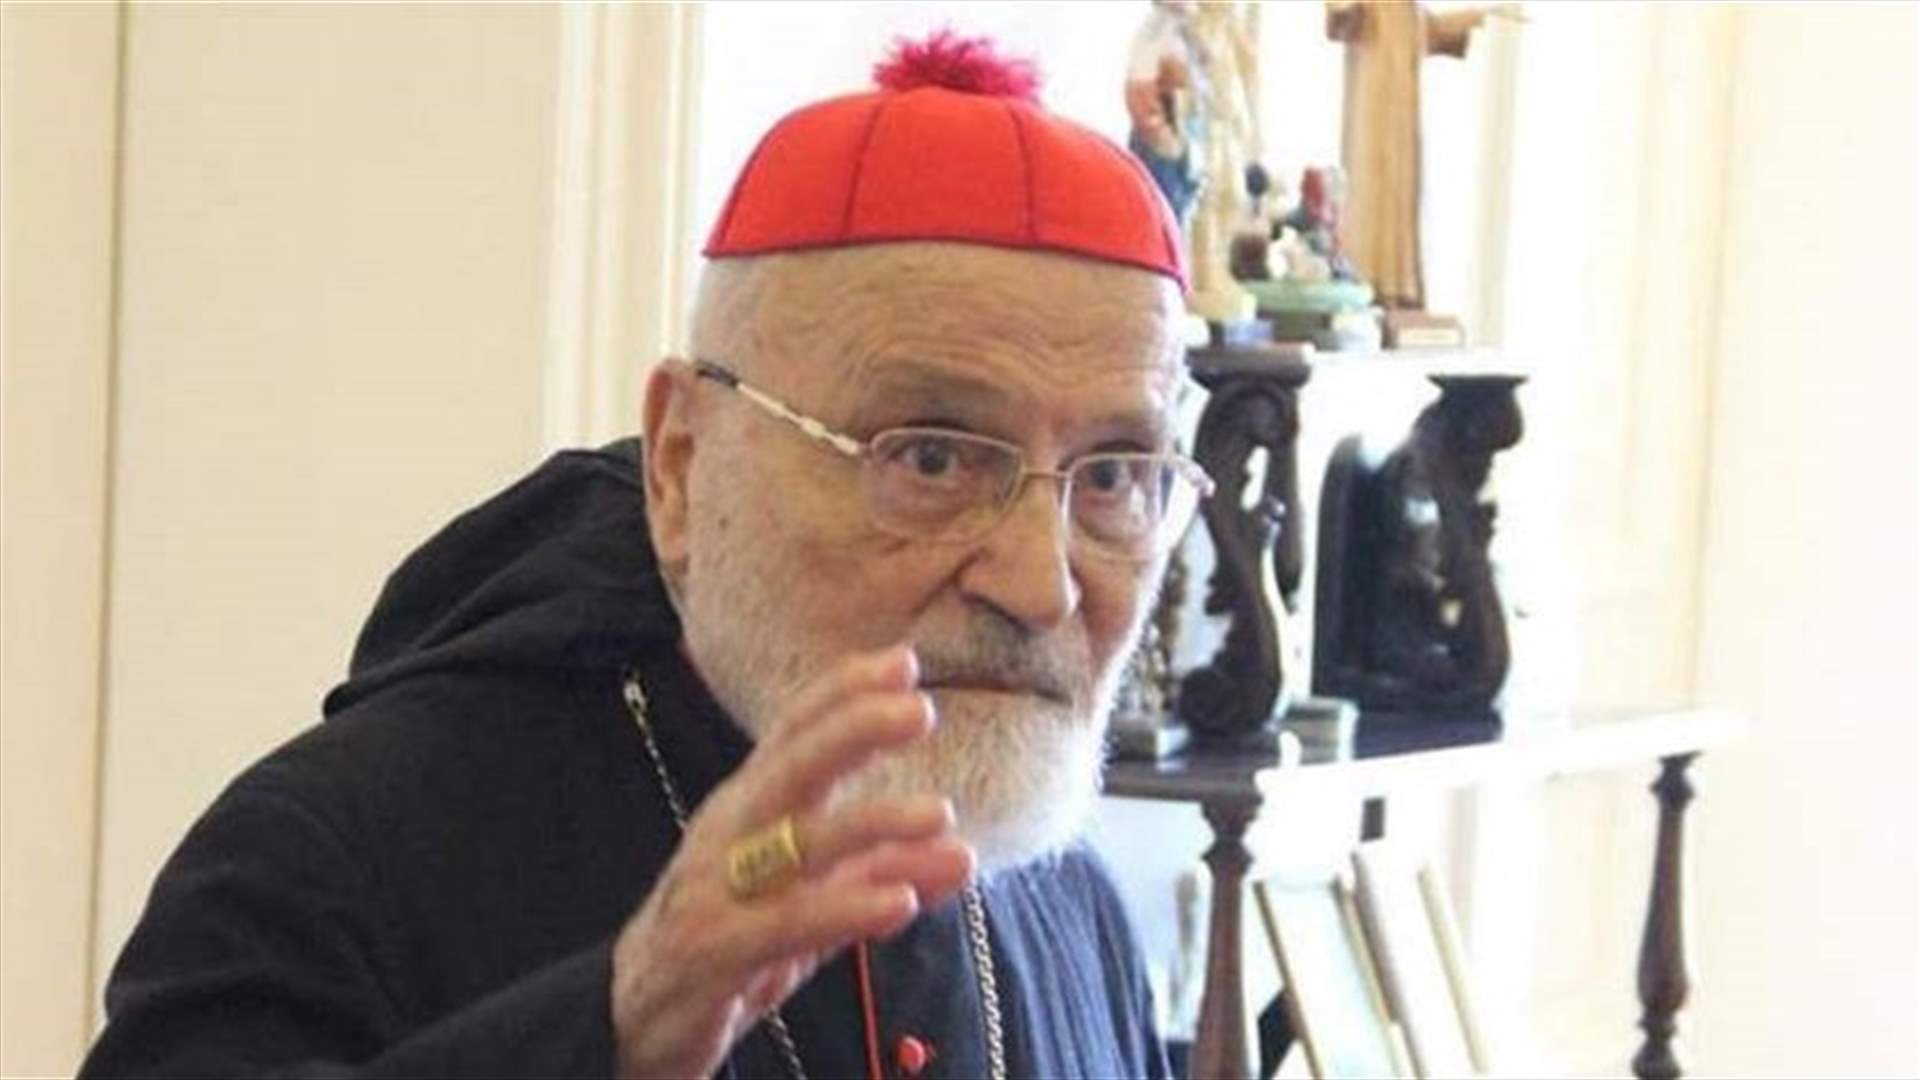 Former Maronite Patriarch Sfeir is in good health - patriarchal media officer